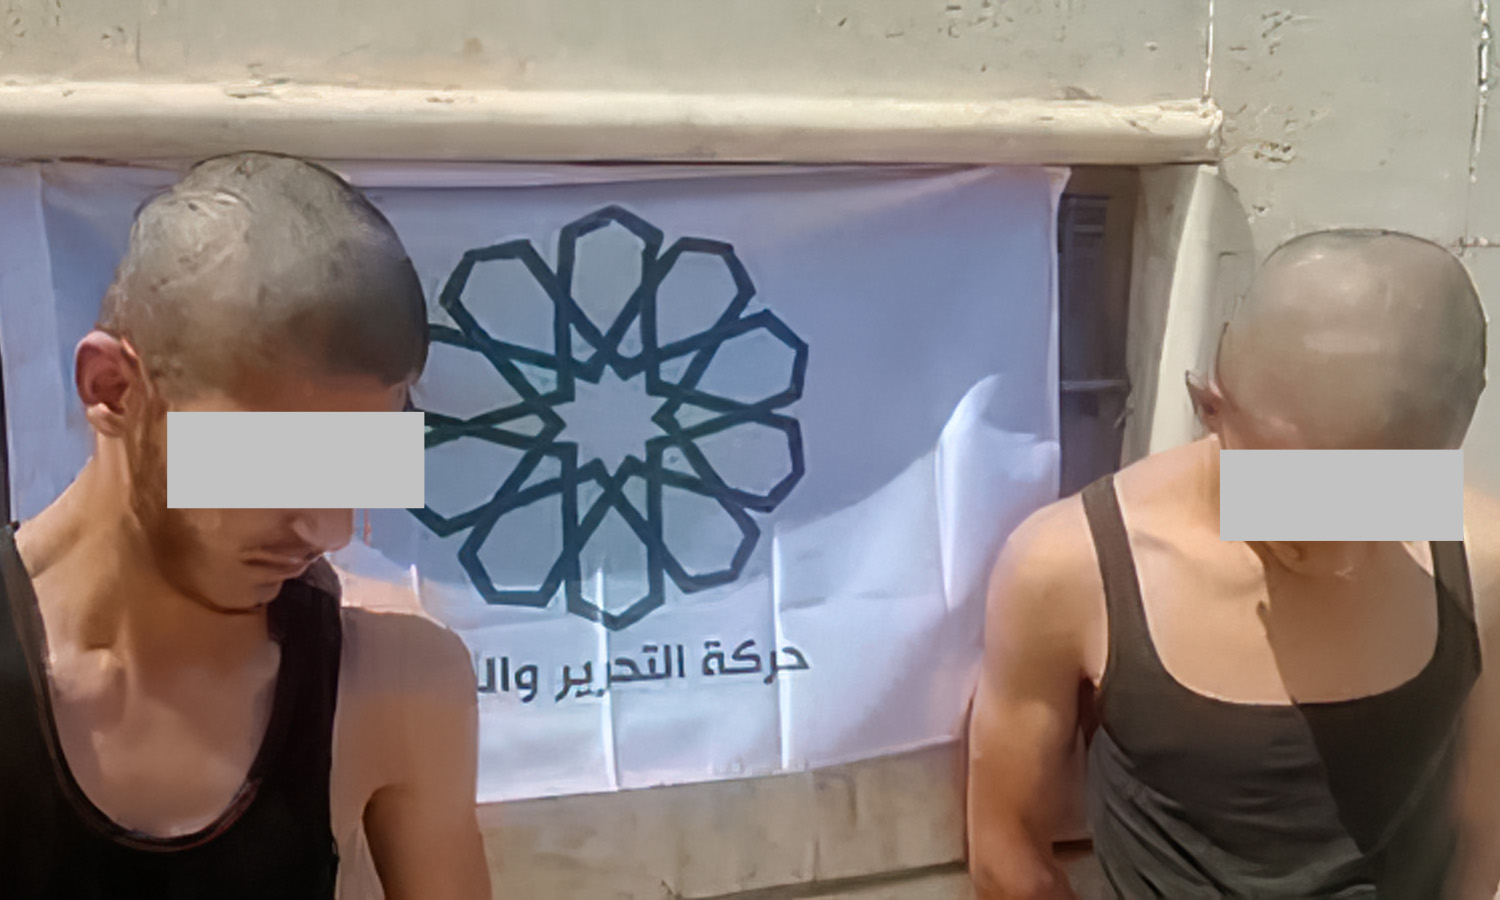 The security forces of the Liberation and Building Movement (LBM) arrested two people whom it said had filmed a video clip that violated public morals in the city of al-Bab (Azaz News Facebook page)